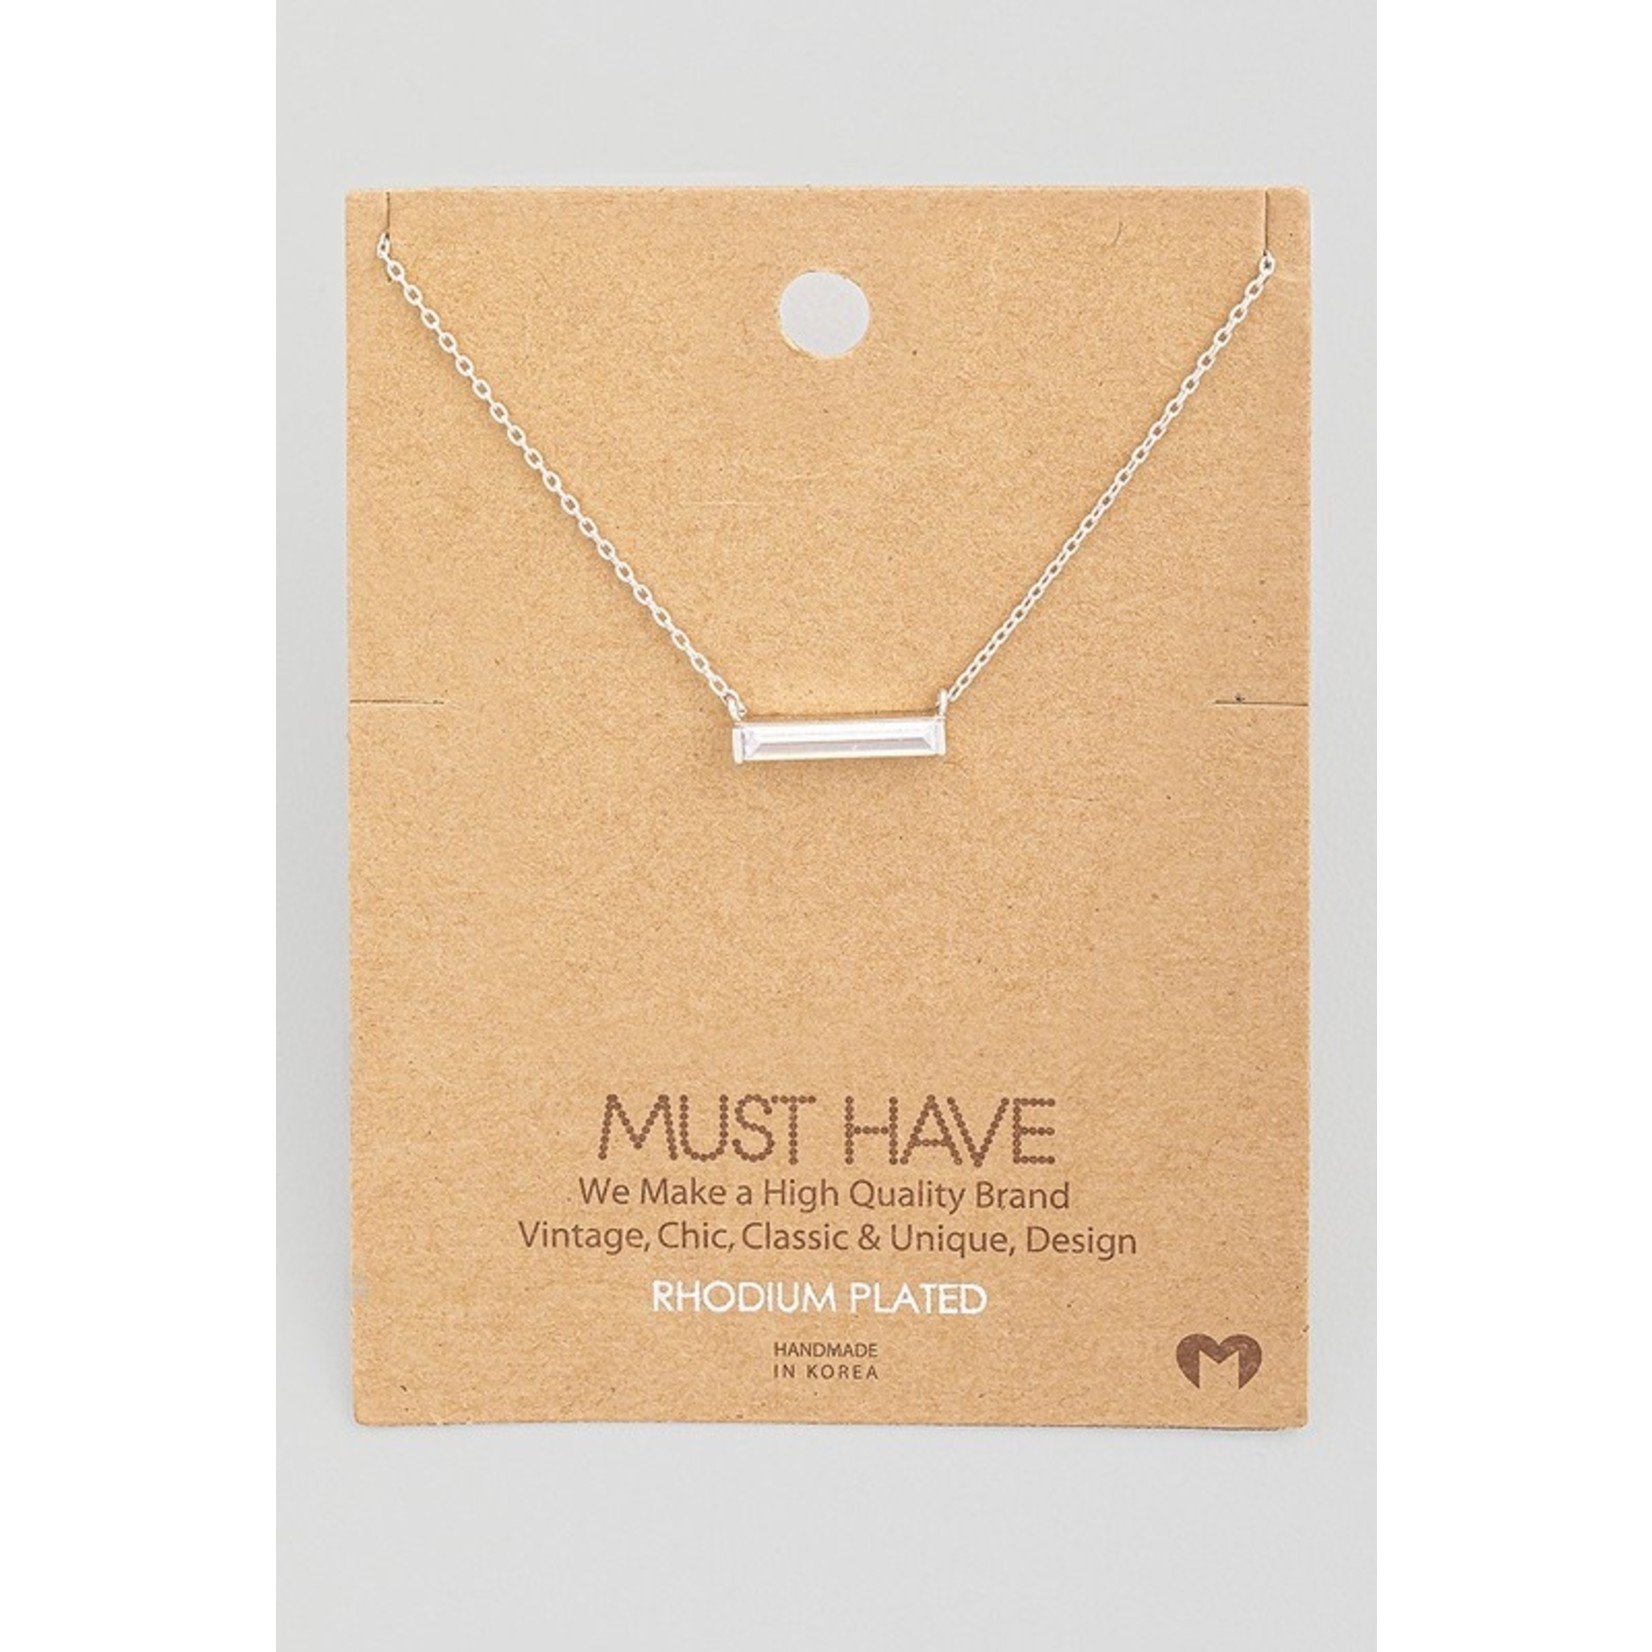 The Thin Bar Pendant Necklace